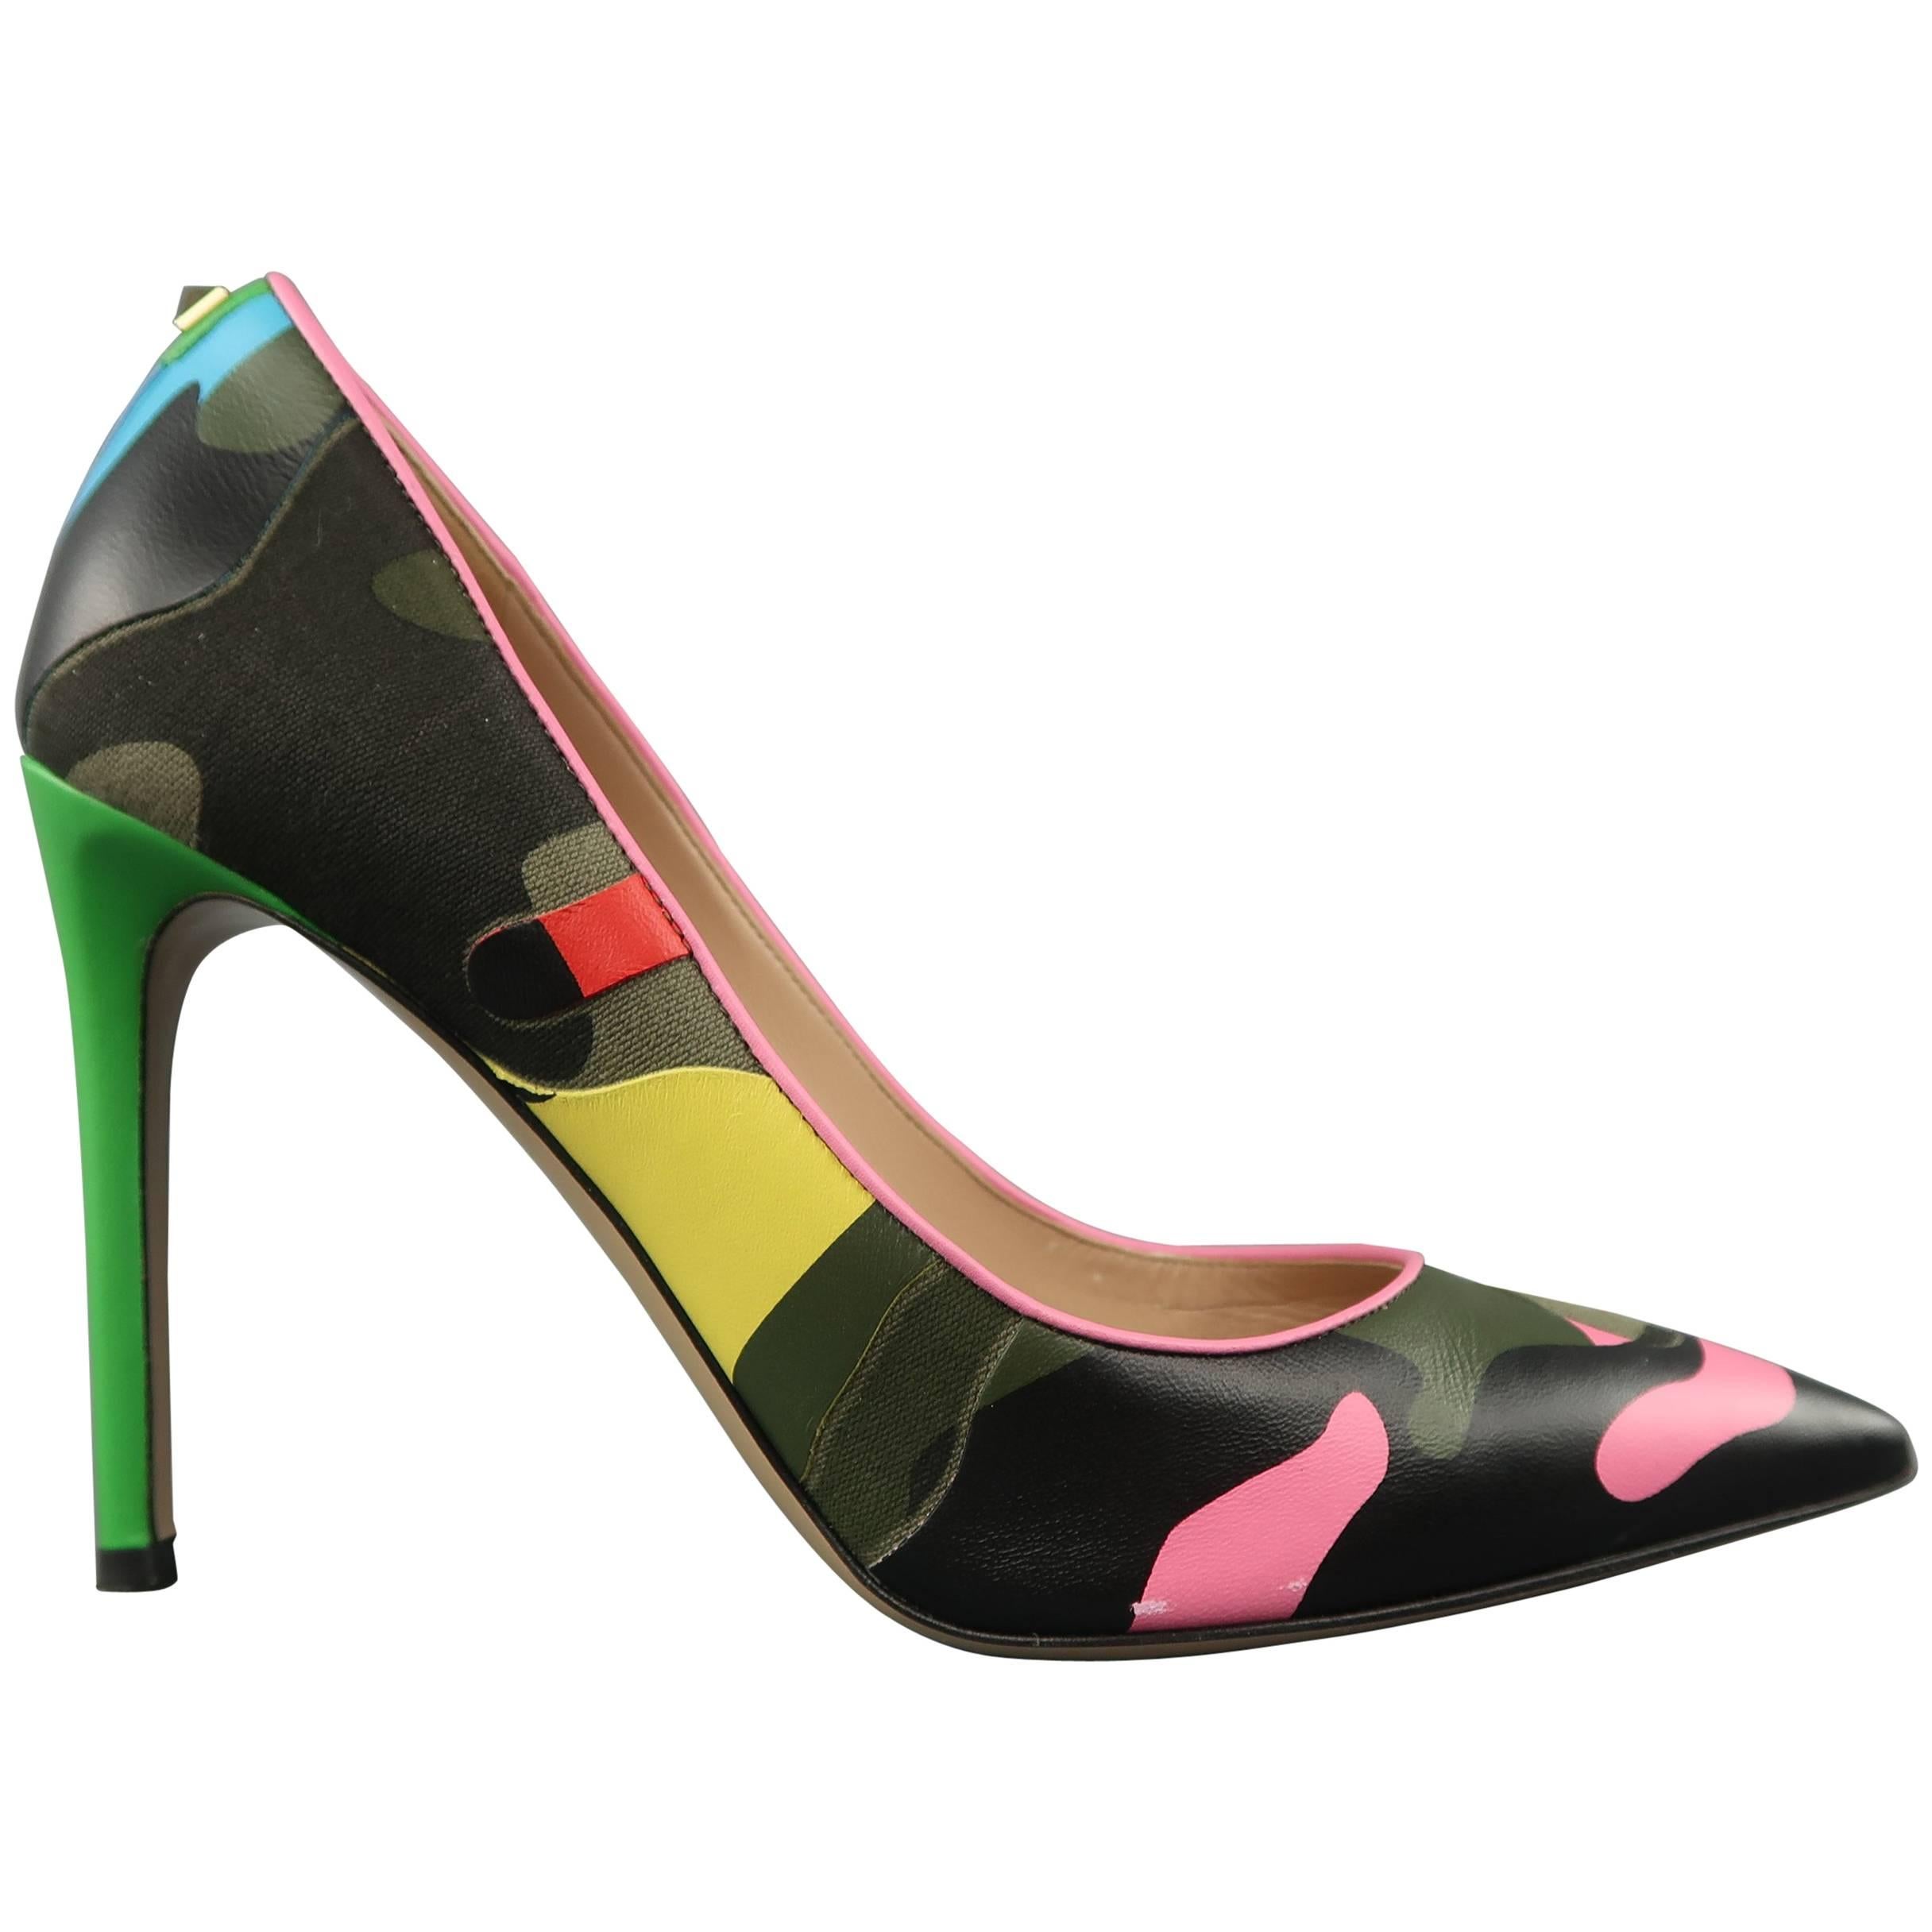 VALENTINO Size 8.5 Psychedelic Camouflage Leather Pumps